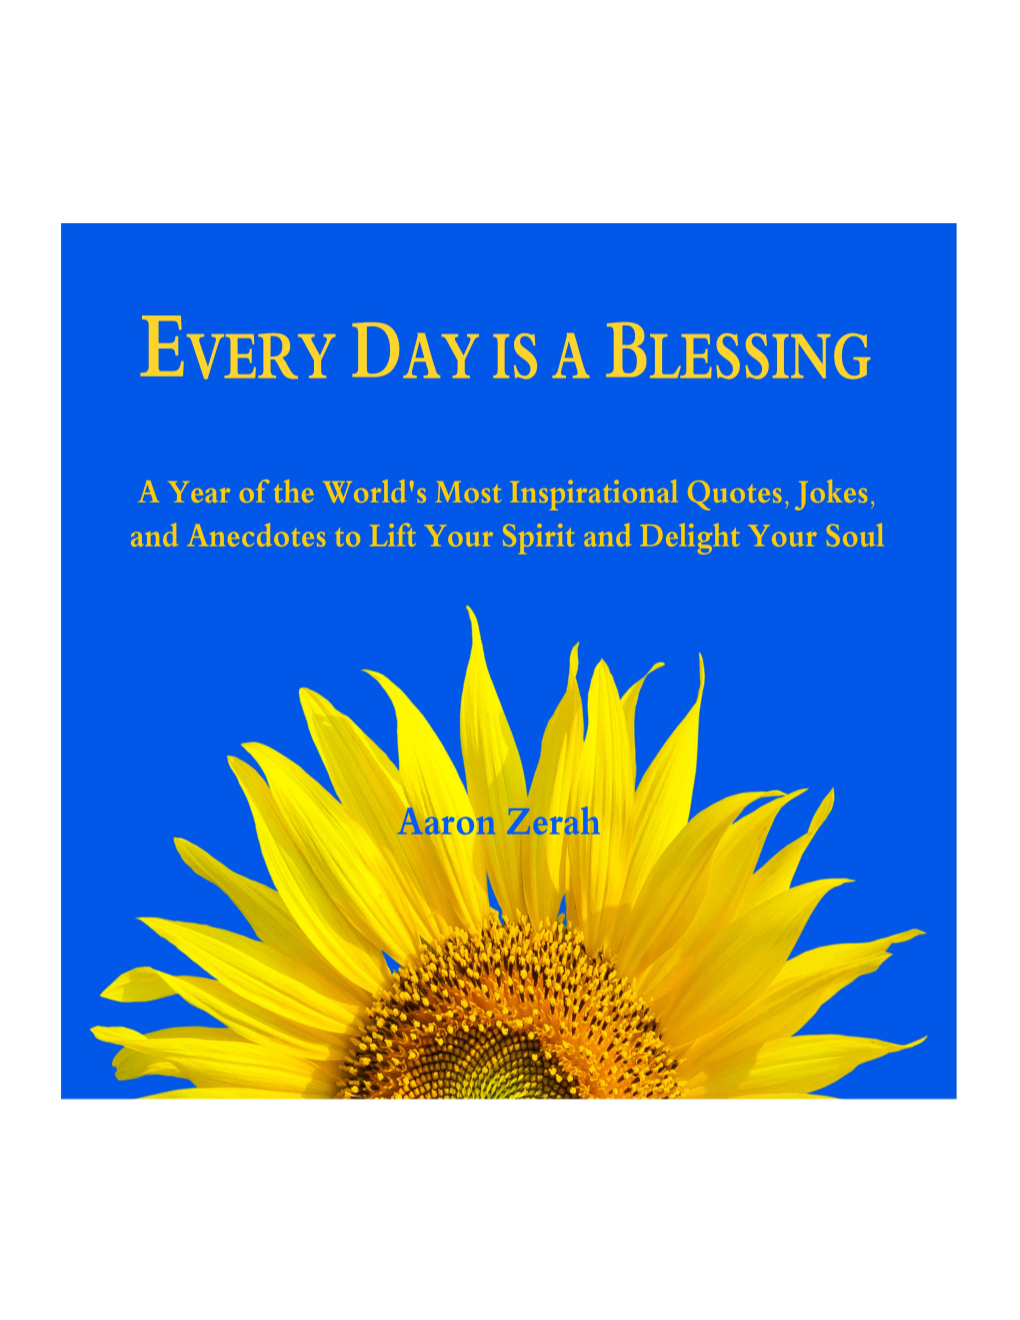 Every Day Is a Blessing a Year of the World's Most Inspirational Quotes, Jokes, and Anecdotes to Lift Your Spirit and Delight Your Soul